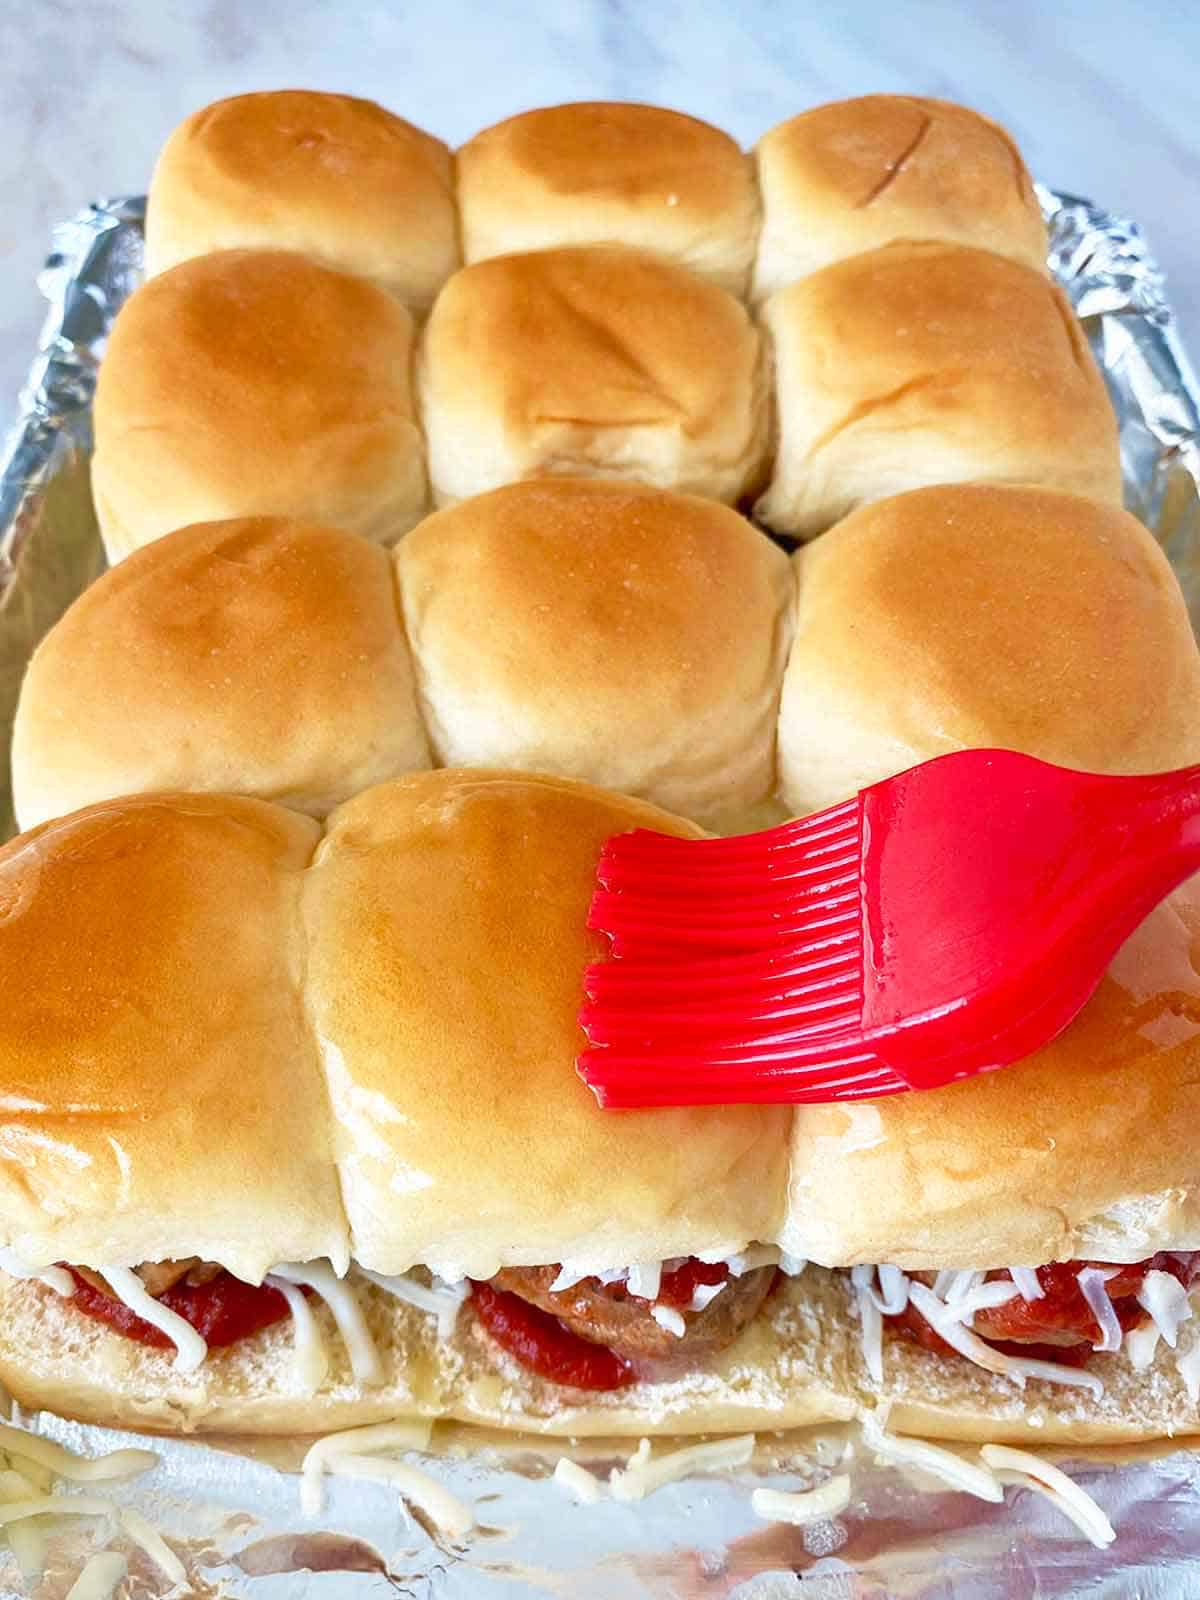 Brushing unbaked sliders with garlic butter using a red silicone brush.